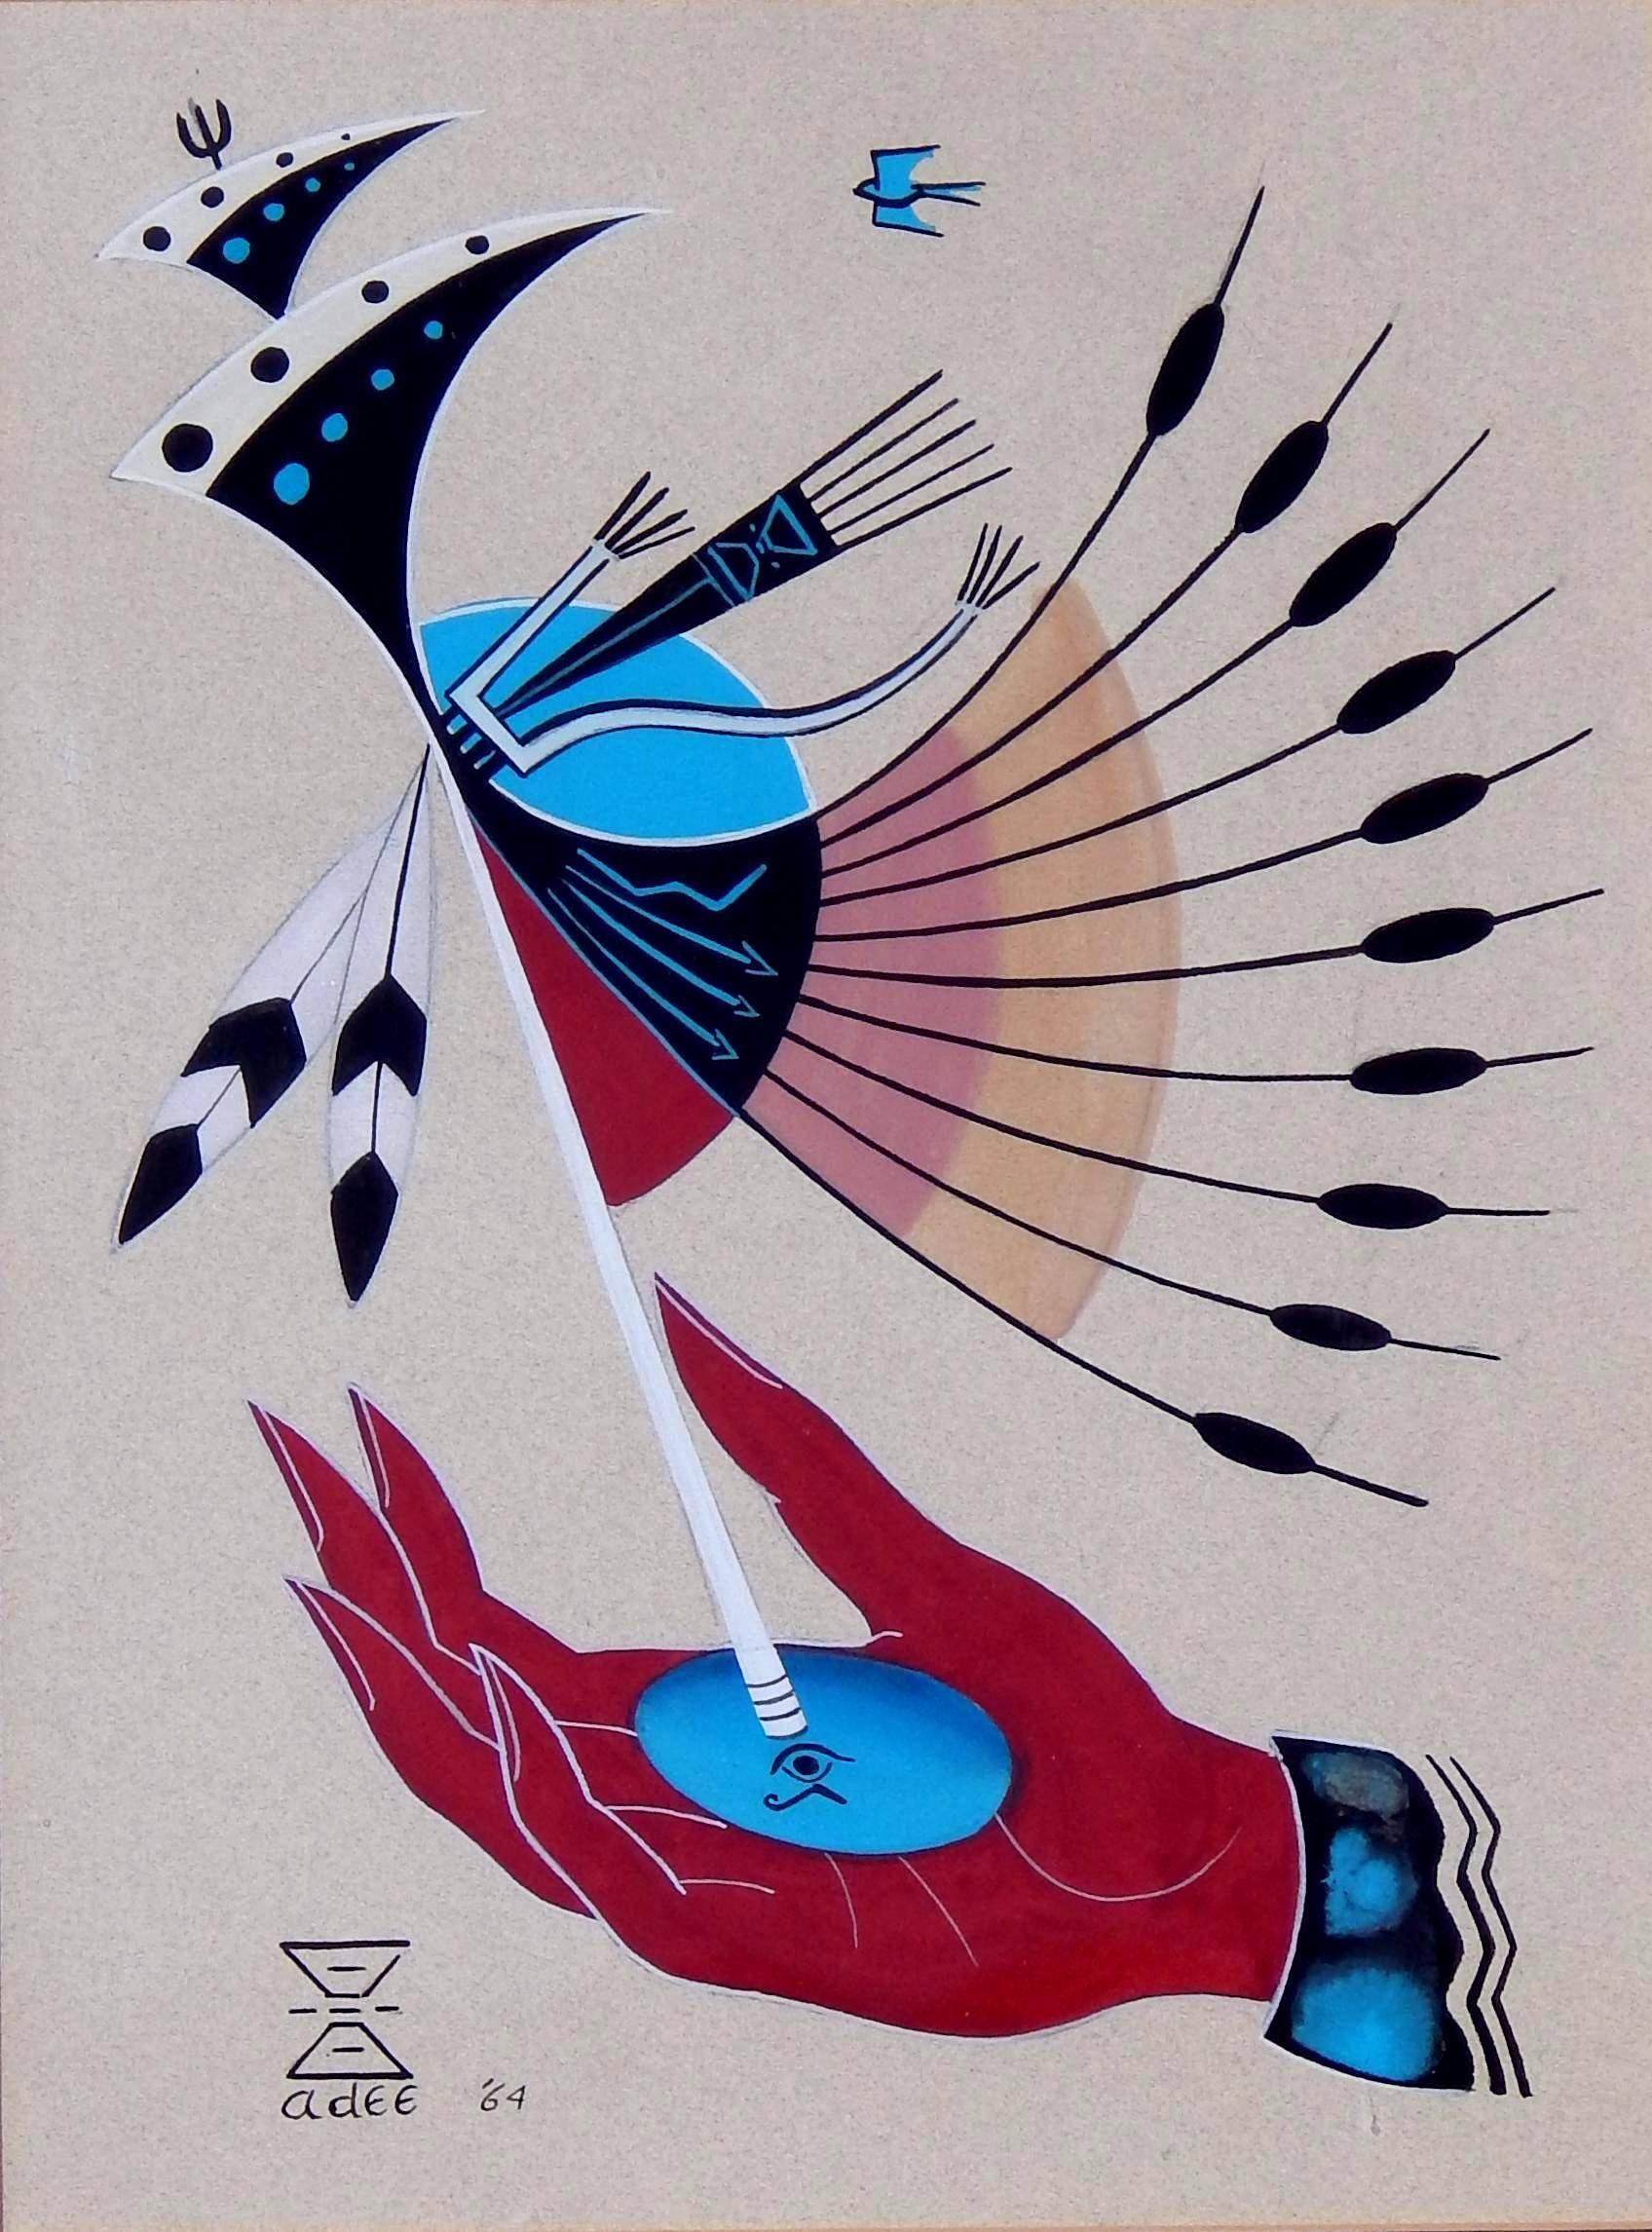 Adee Dodge (1911-1992) Surreal Gouache, 1964
Native American Artist - Navajo.
Framed Under Glass and in excellent condition.
Image measures 12